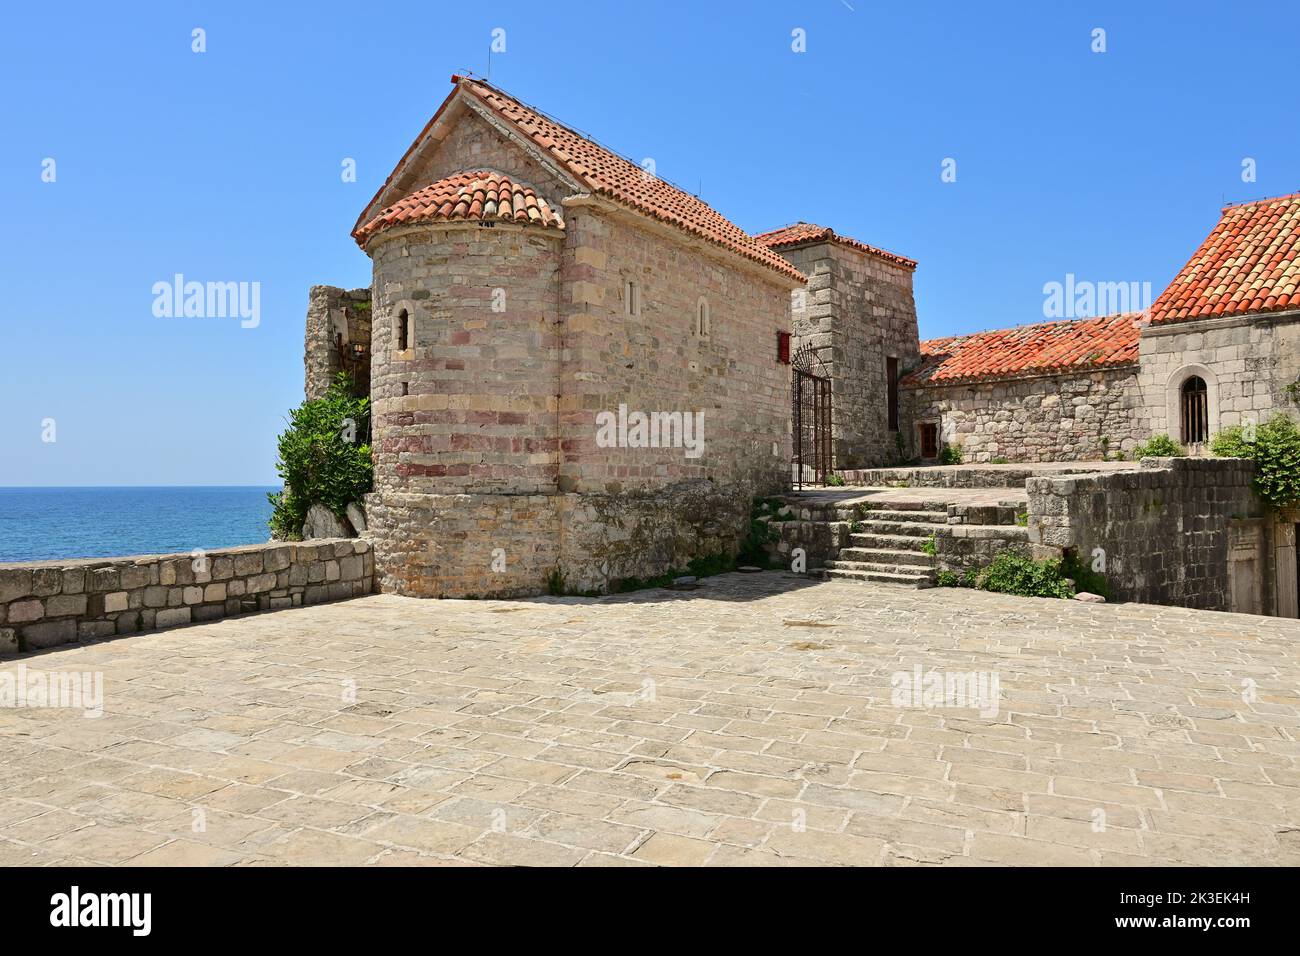 Church of St. Sabba the Sanctified. Architecture of the Old Town in Budva. Montenegro Stock Photo